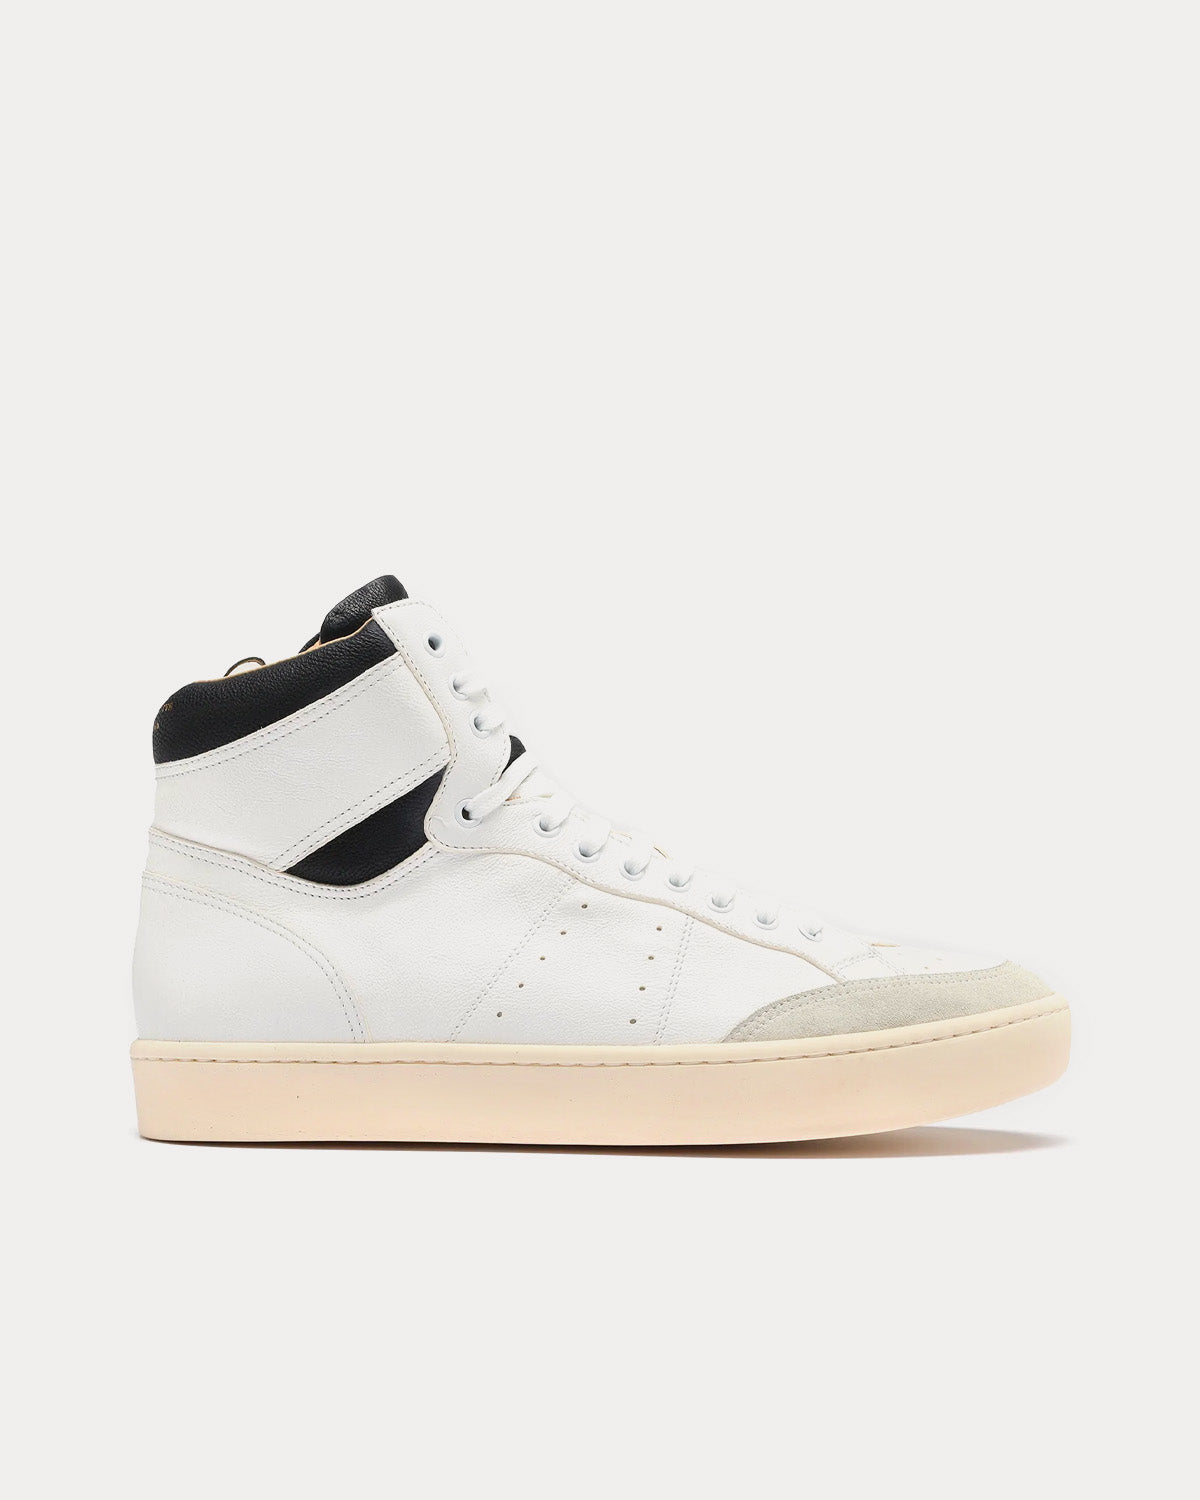 Officine Creative - Knight 005 White / Black High Top Sneakers